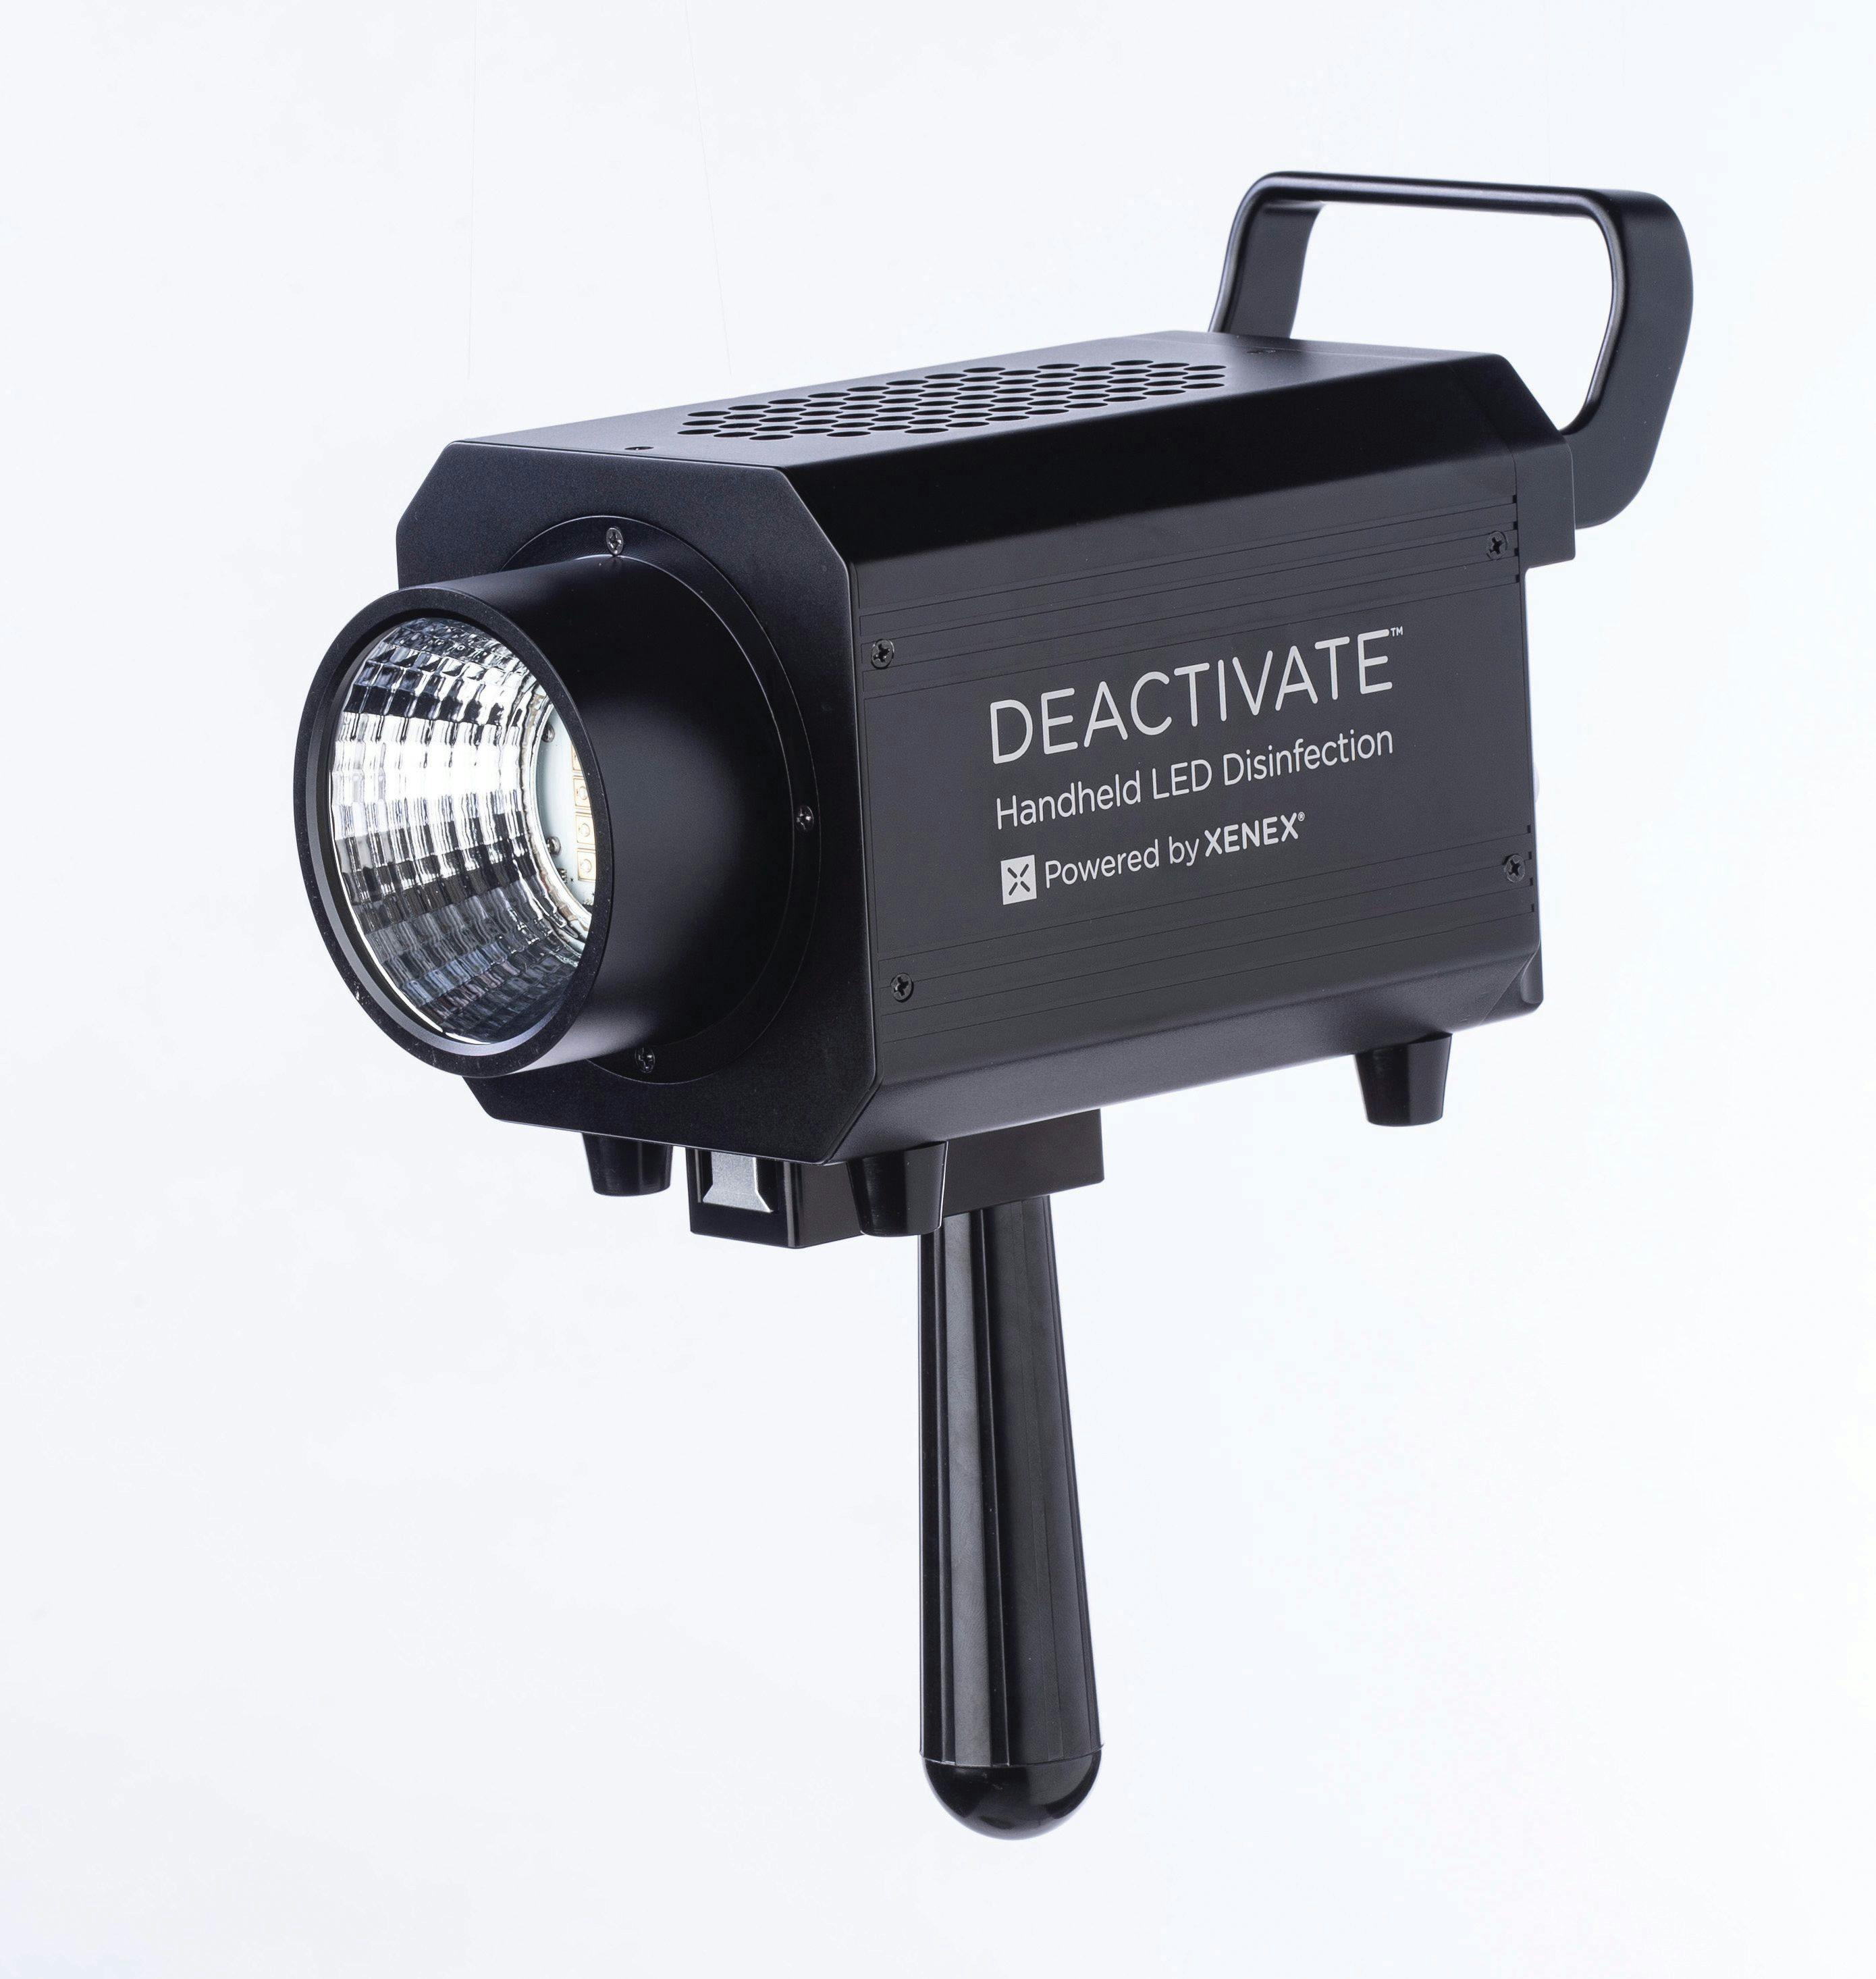 Deactivate handheld LED Disinfection